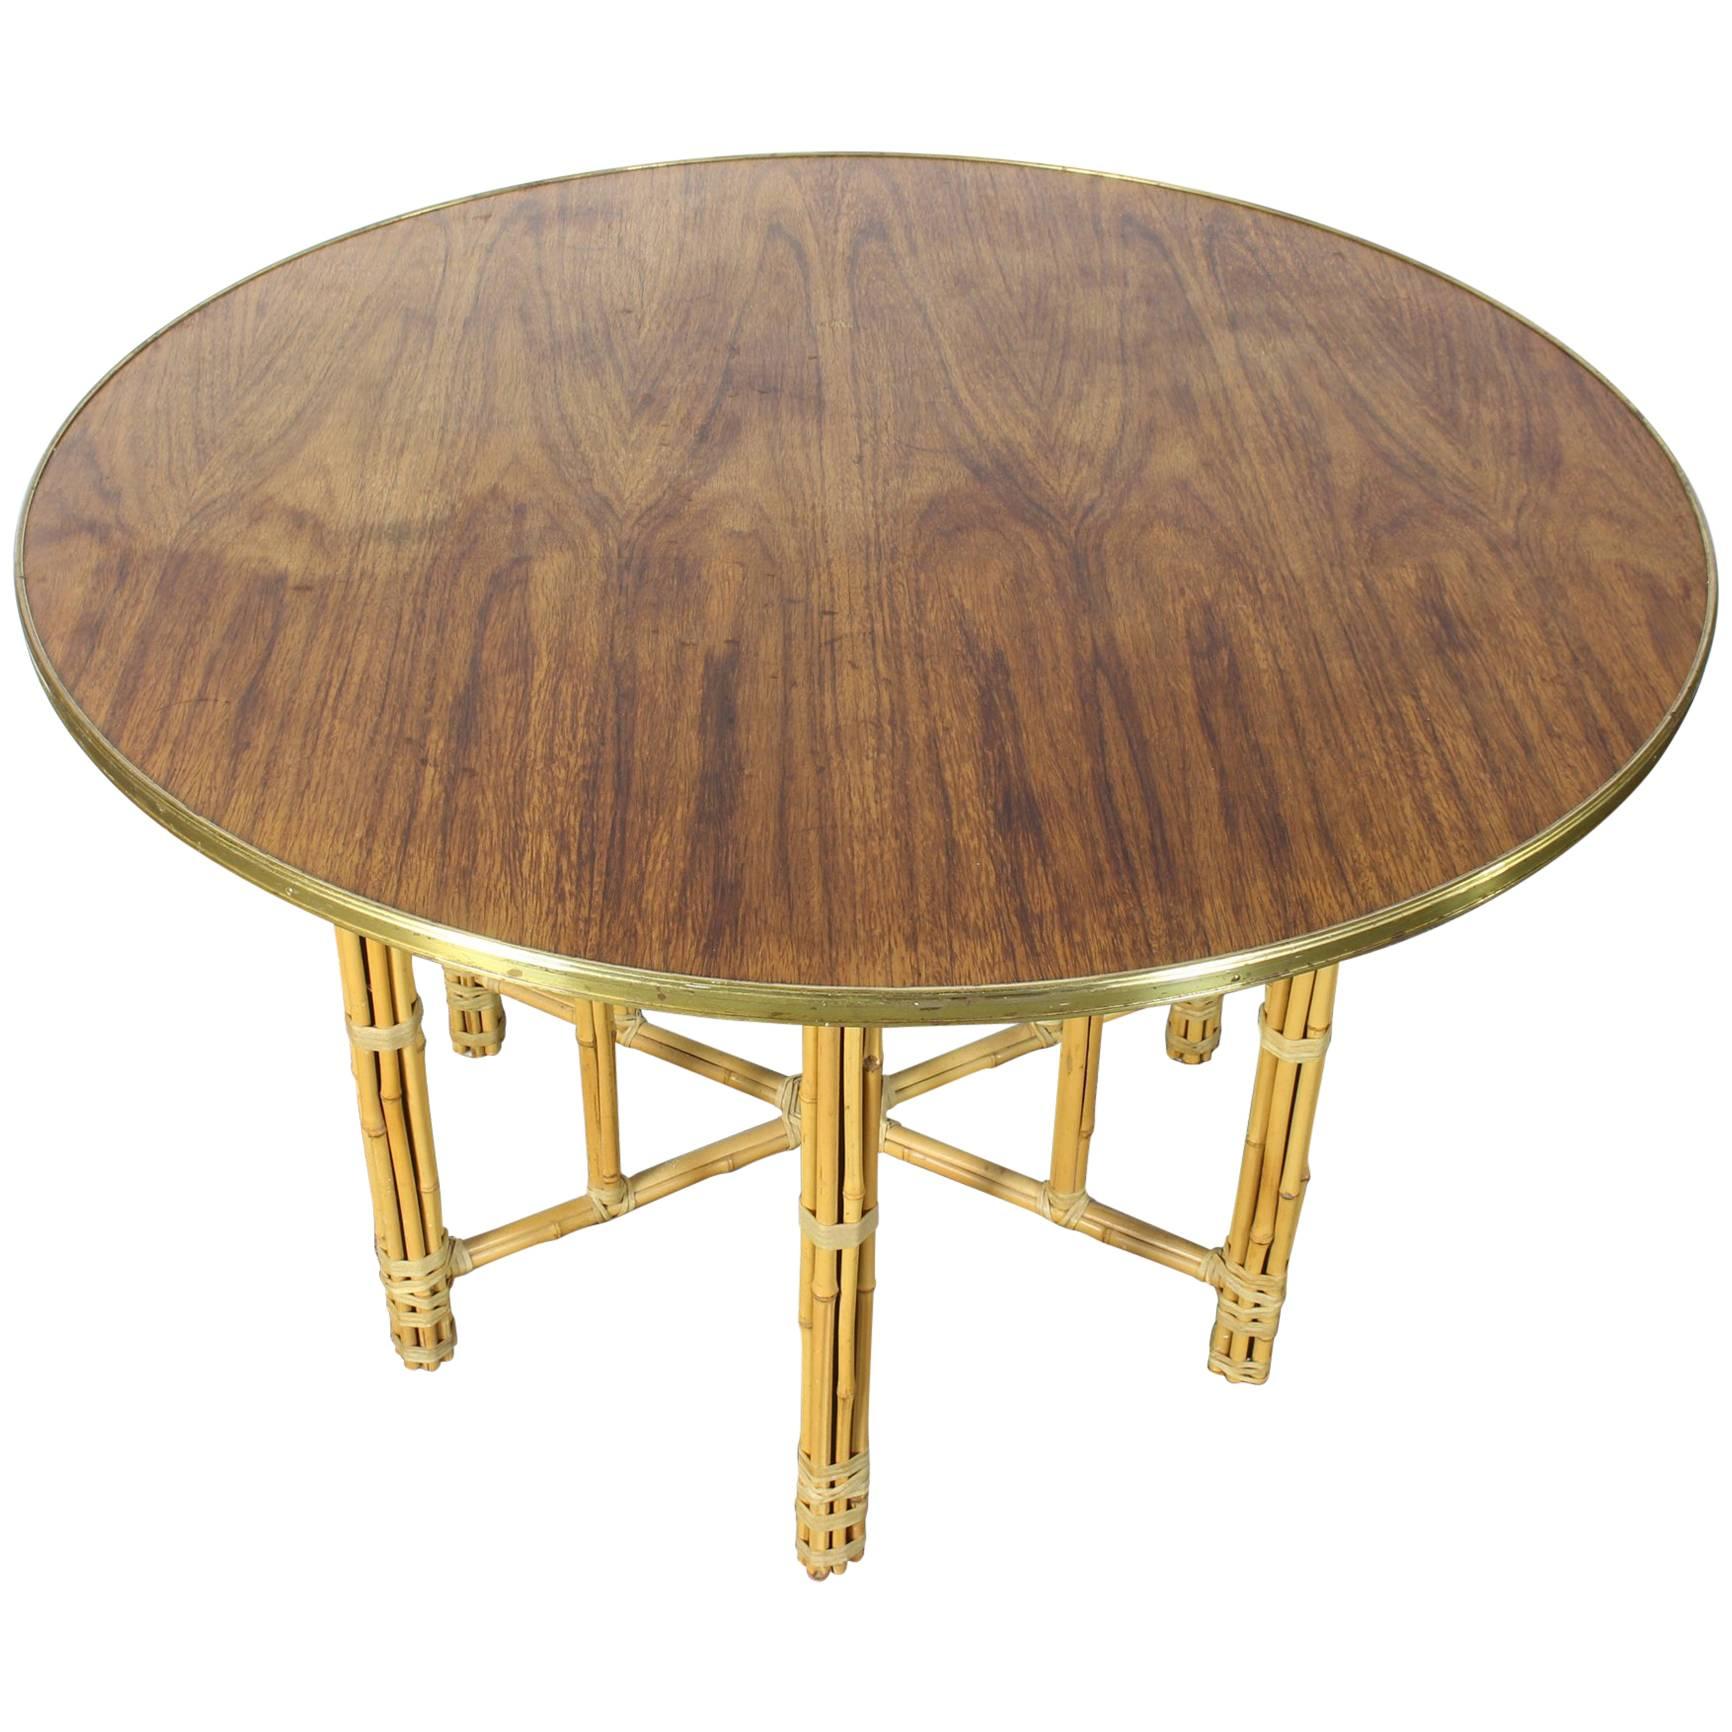 Round Rosewood and Brass Dining Table with Bamboo Base